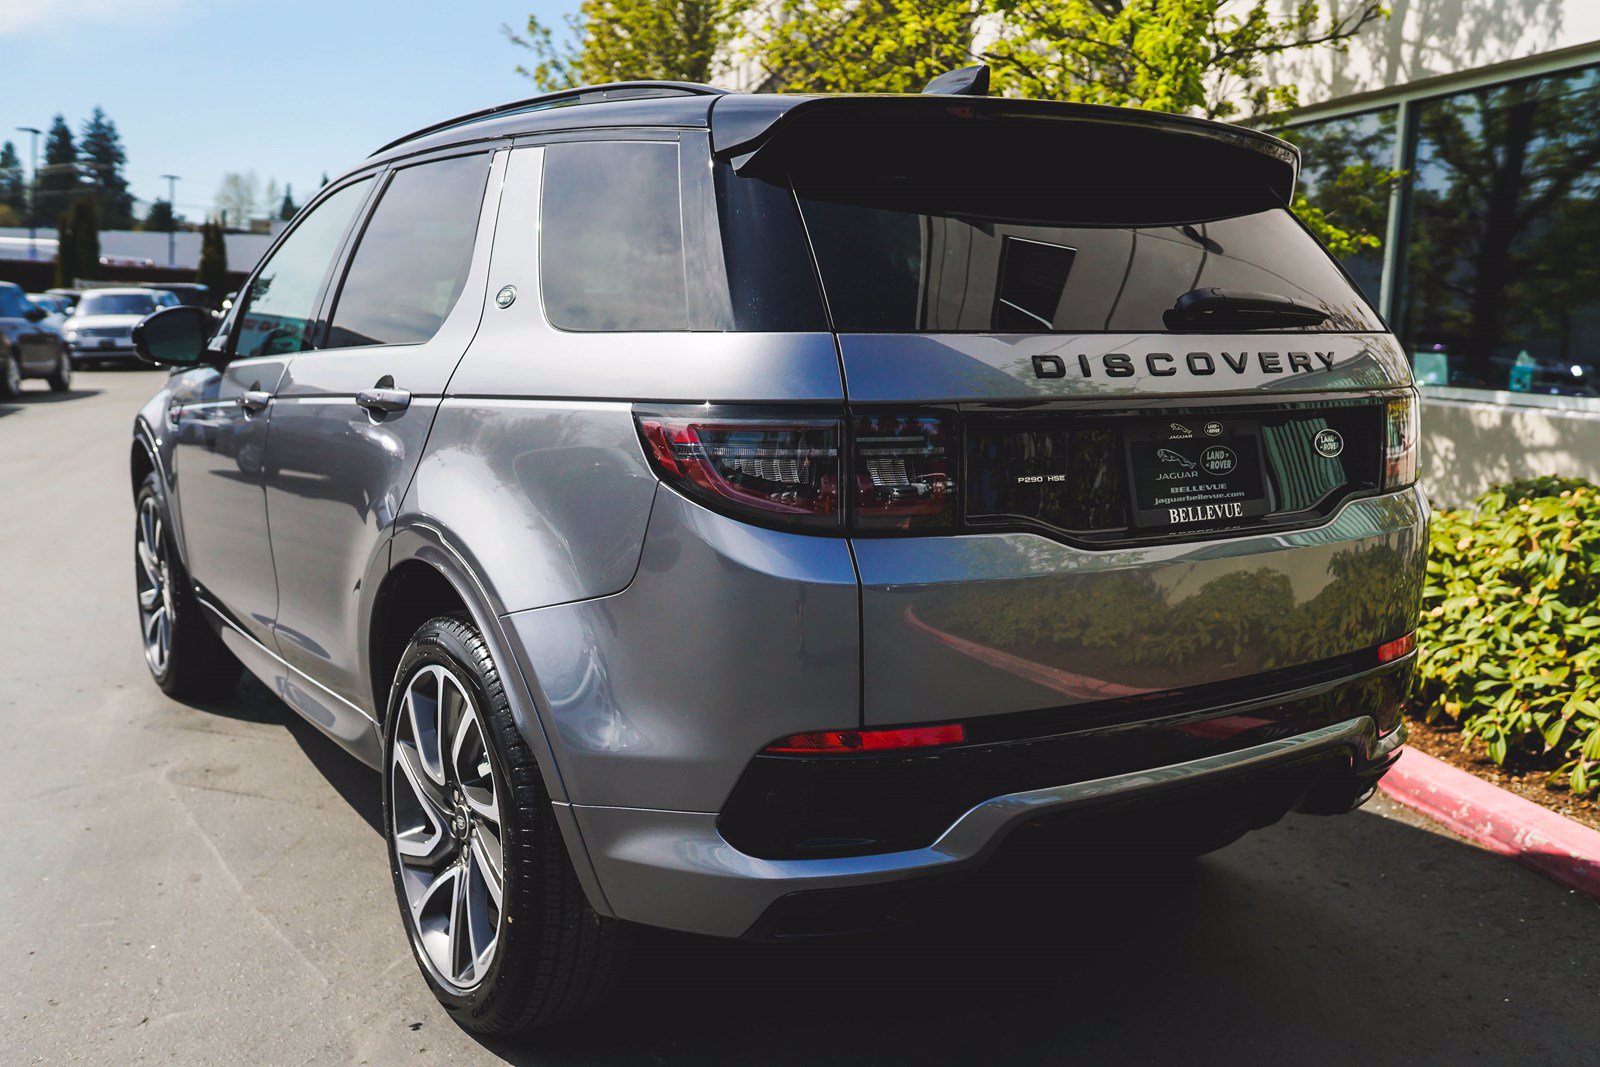 25 HQ Images 2020 Discovery Sport Hse : New 2020 Land Rover Discovery HSE Luxury 4D Sport Utility ...